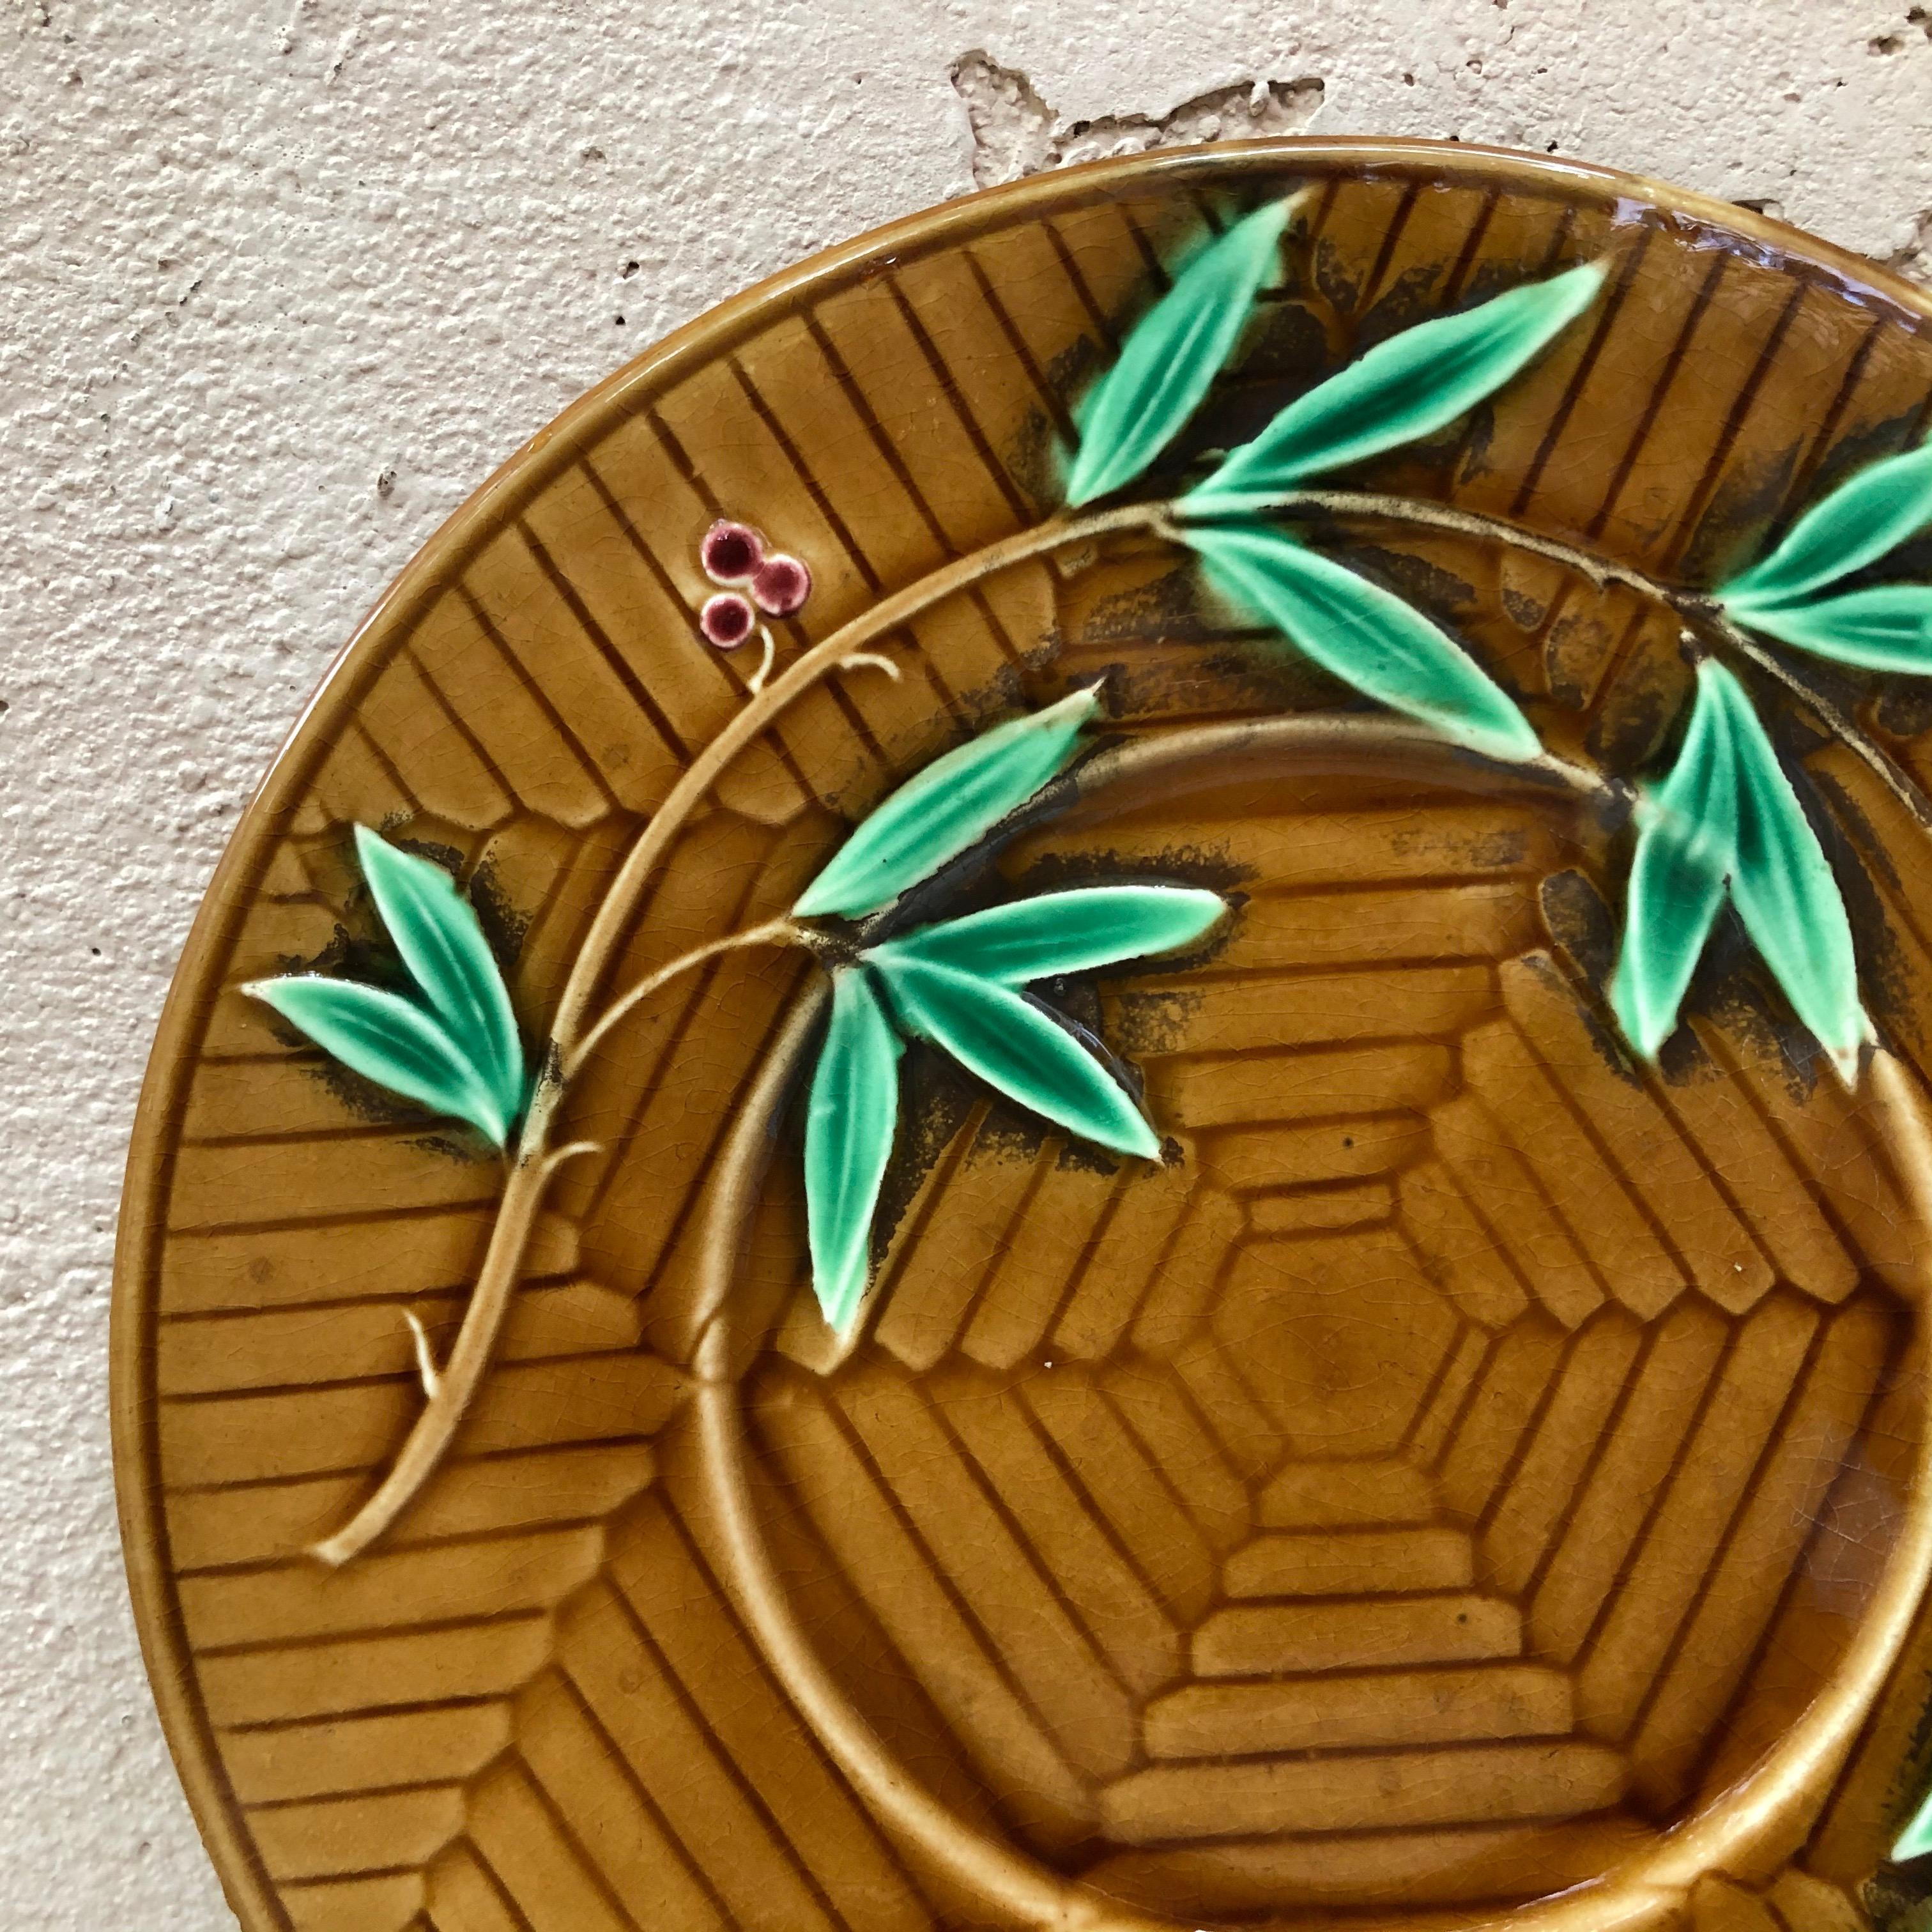 French Majolica leaves plate, circa 1890.
Attributed to Sarreguemines.